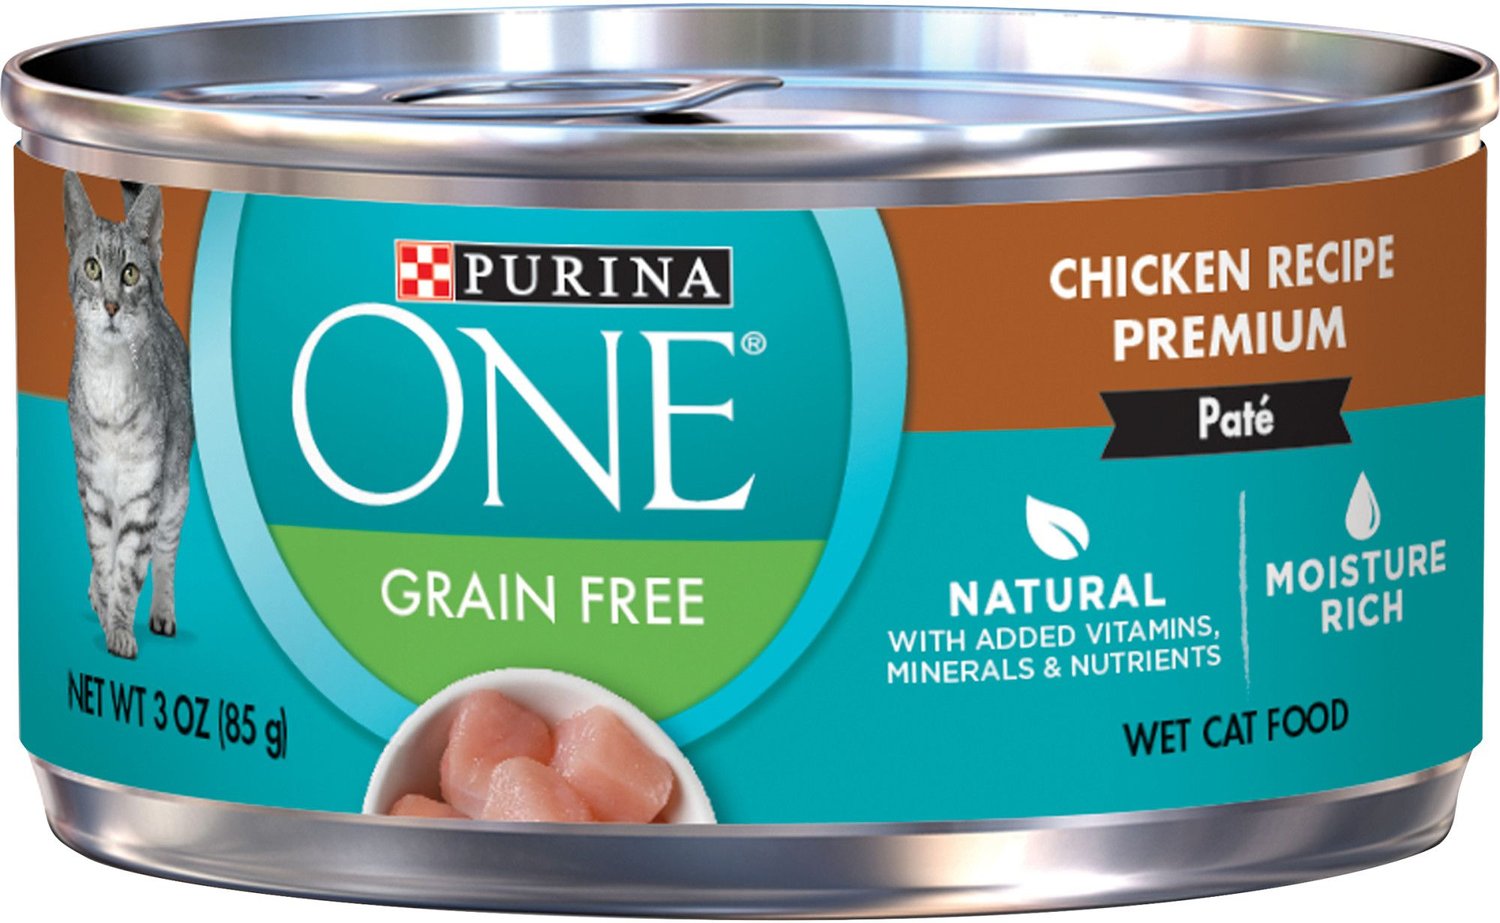 PURINA ONE Chicken Recipe Pate Grain-Free Canned Cat Food, 3-oz, case of 24  - Chewy.com